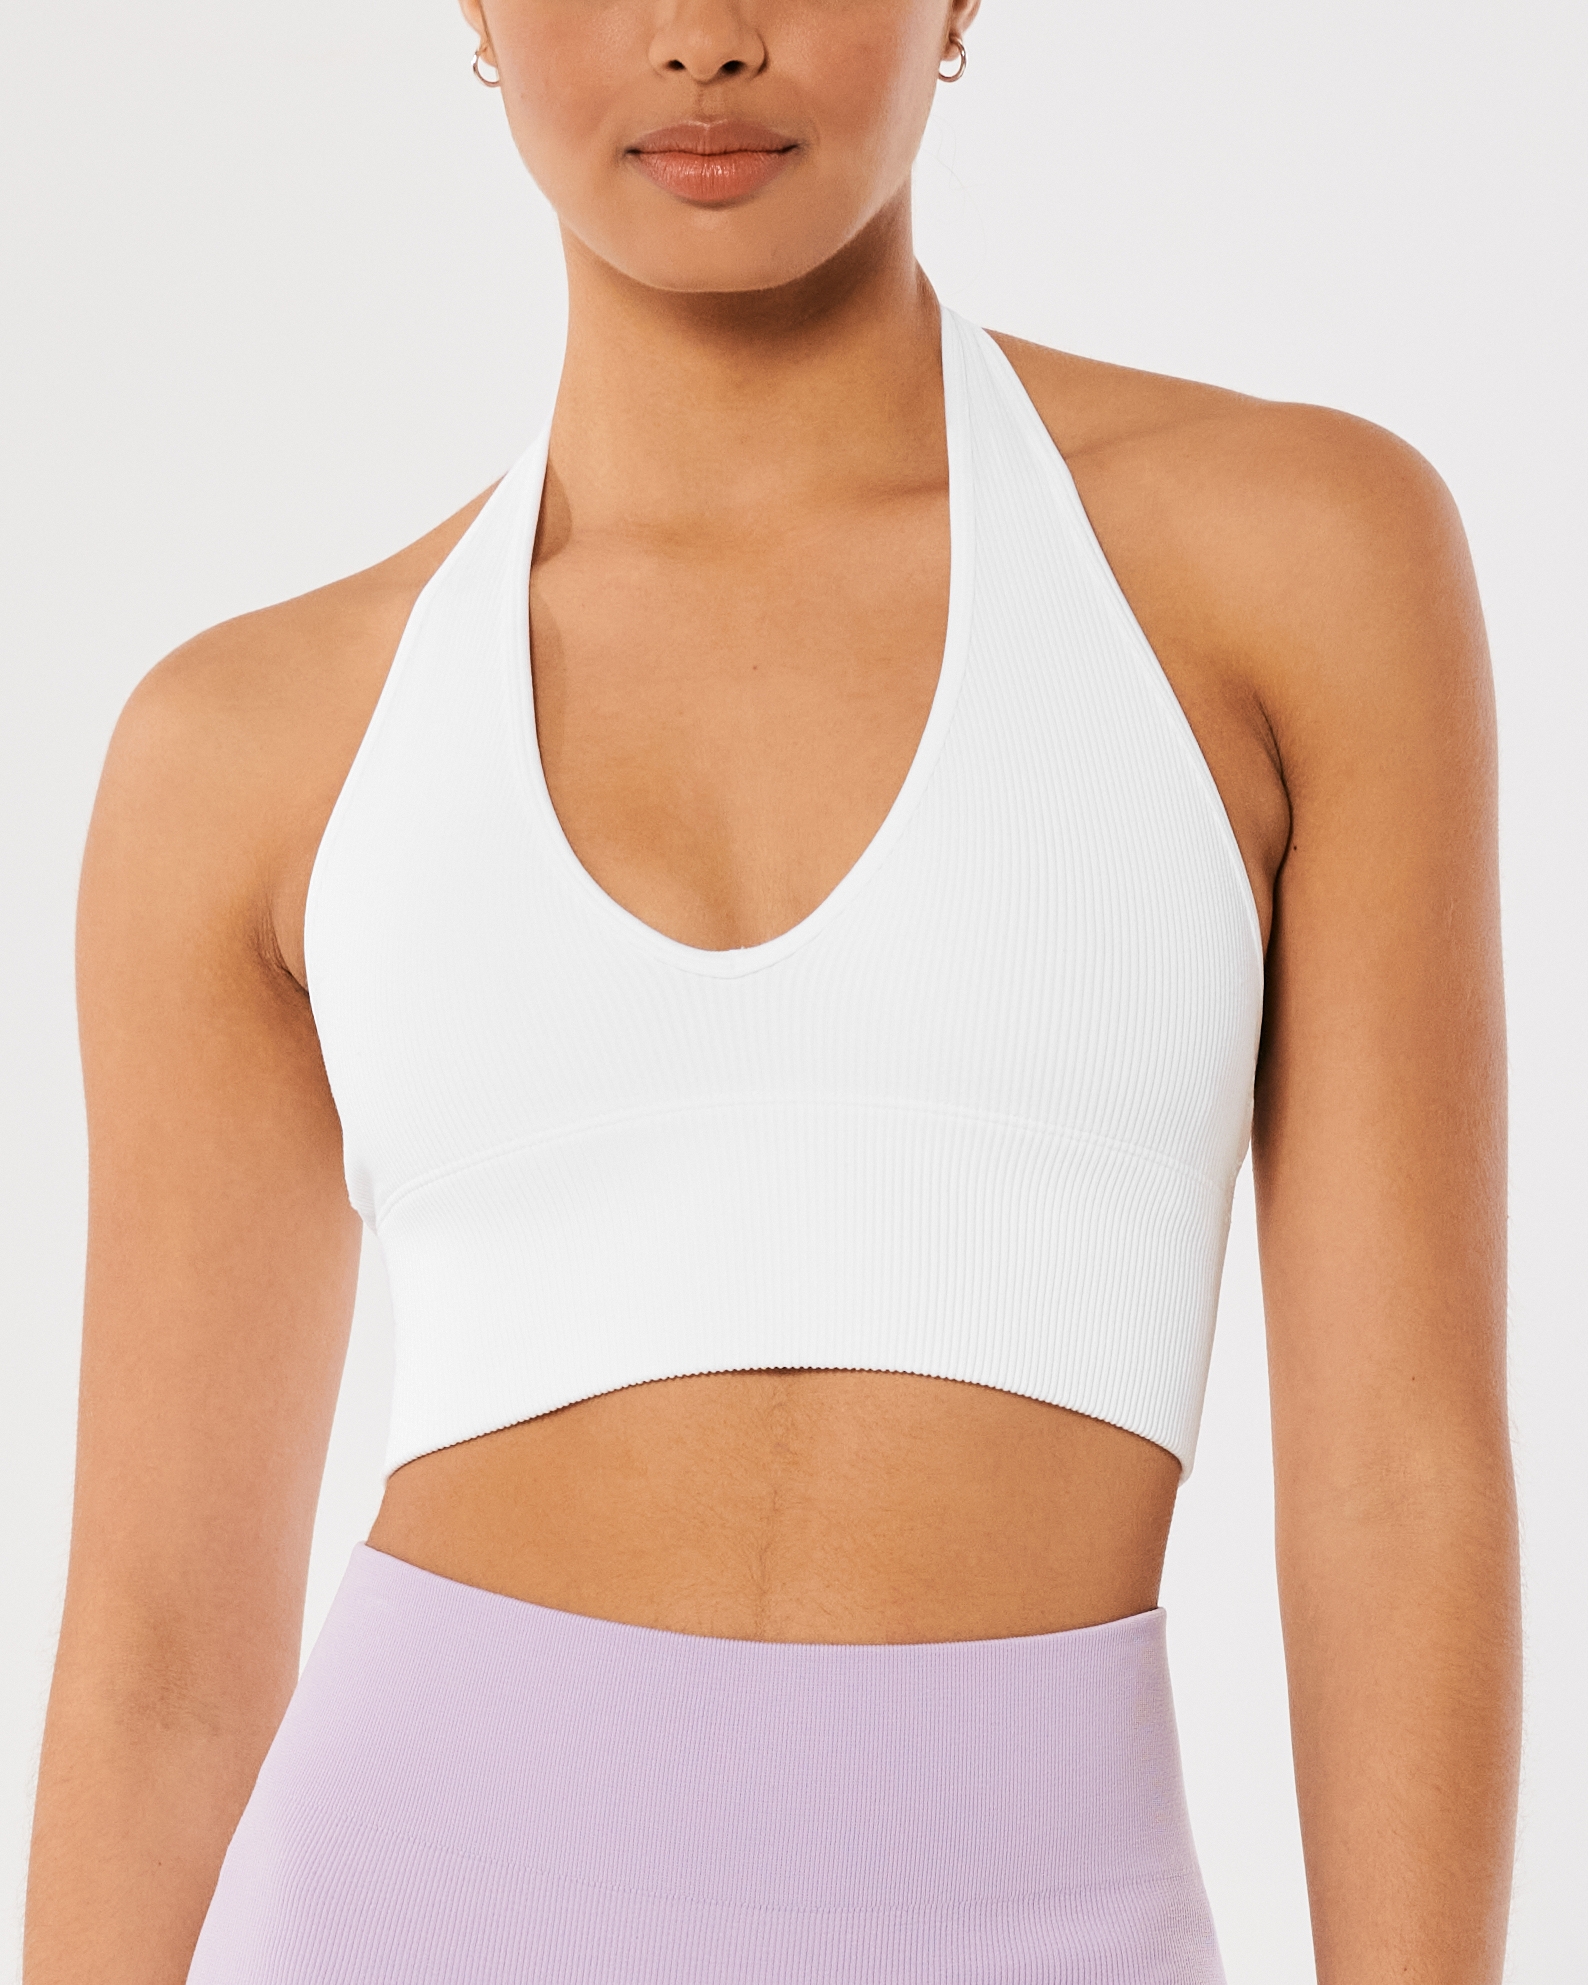 Gilly Hicks Seamless Sports Bras for Women